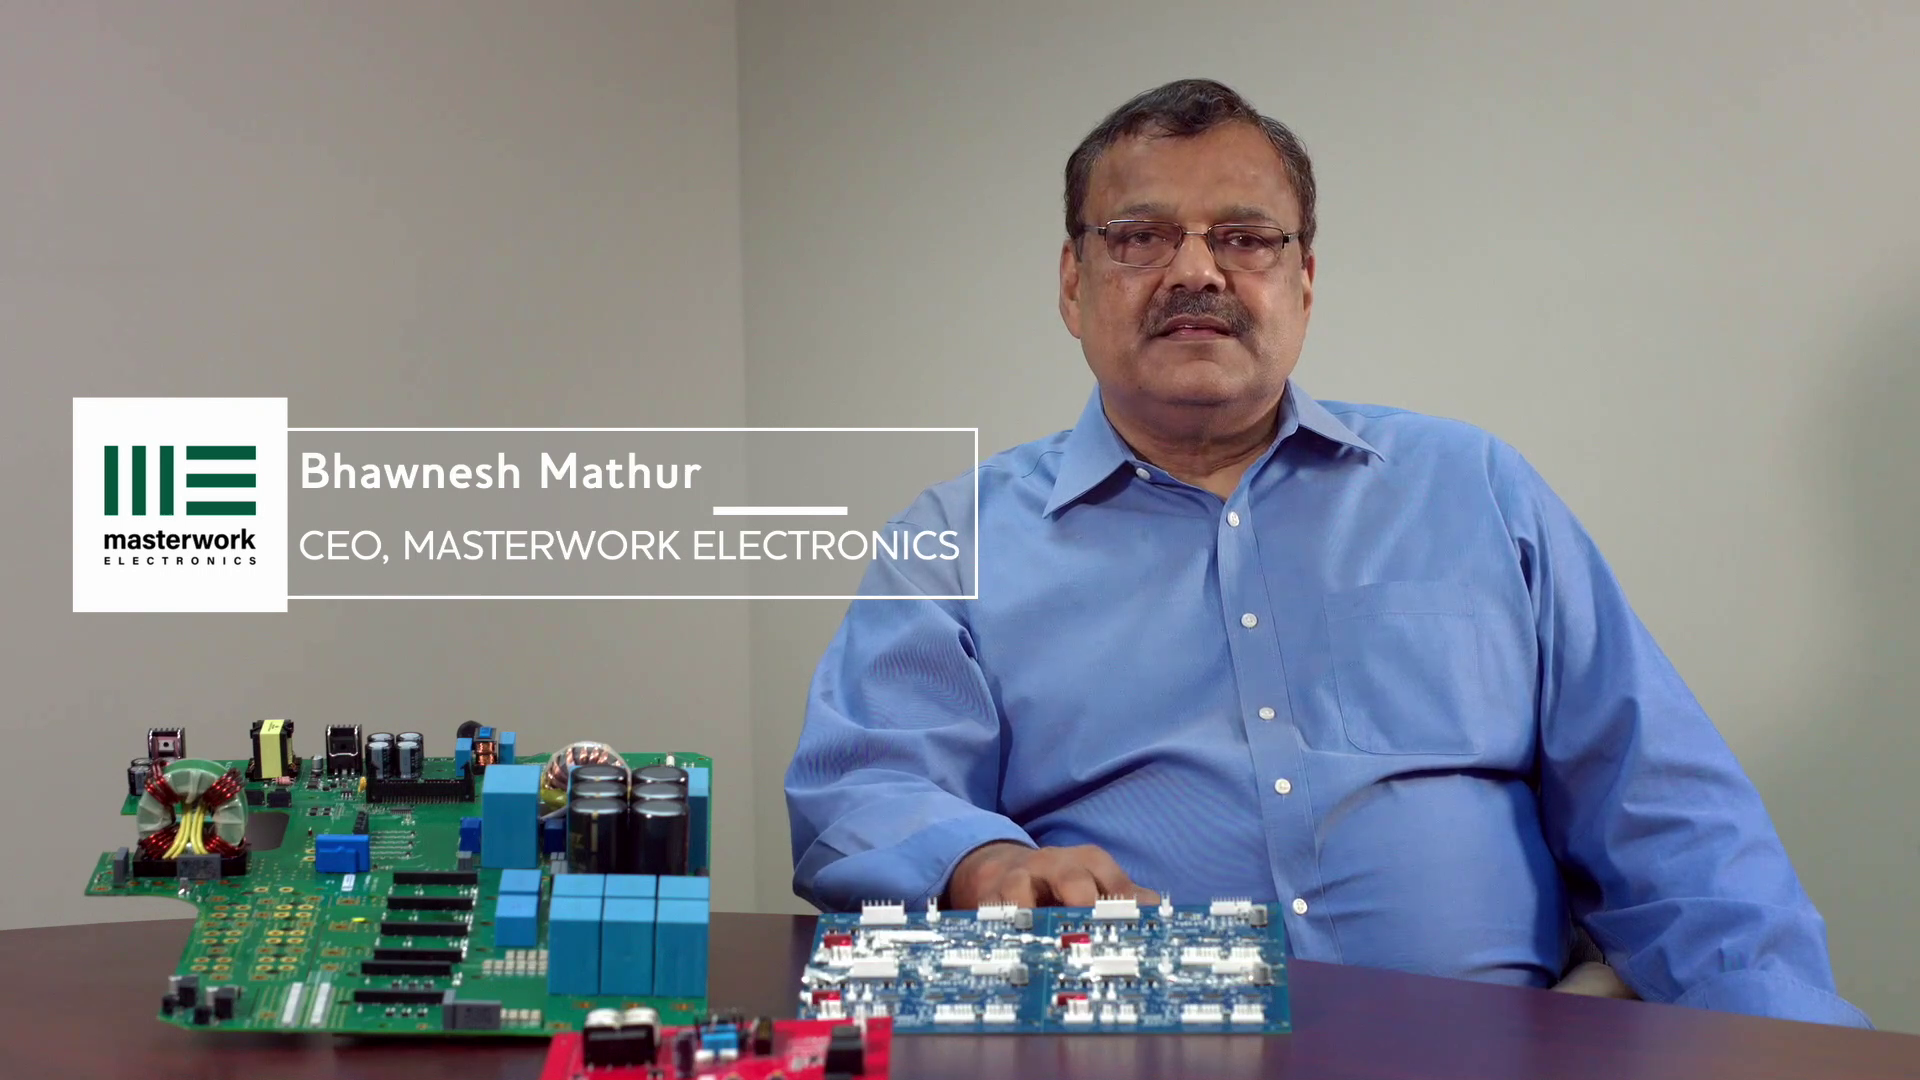 Interview with Bhawnesh Mathur, CEO of Masterwork Electronics